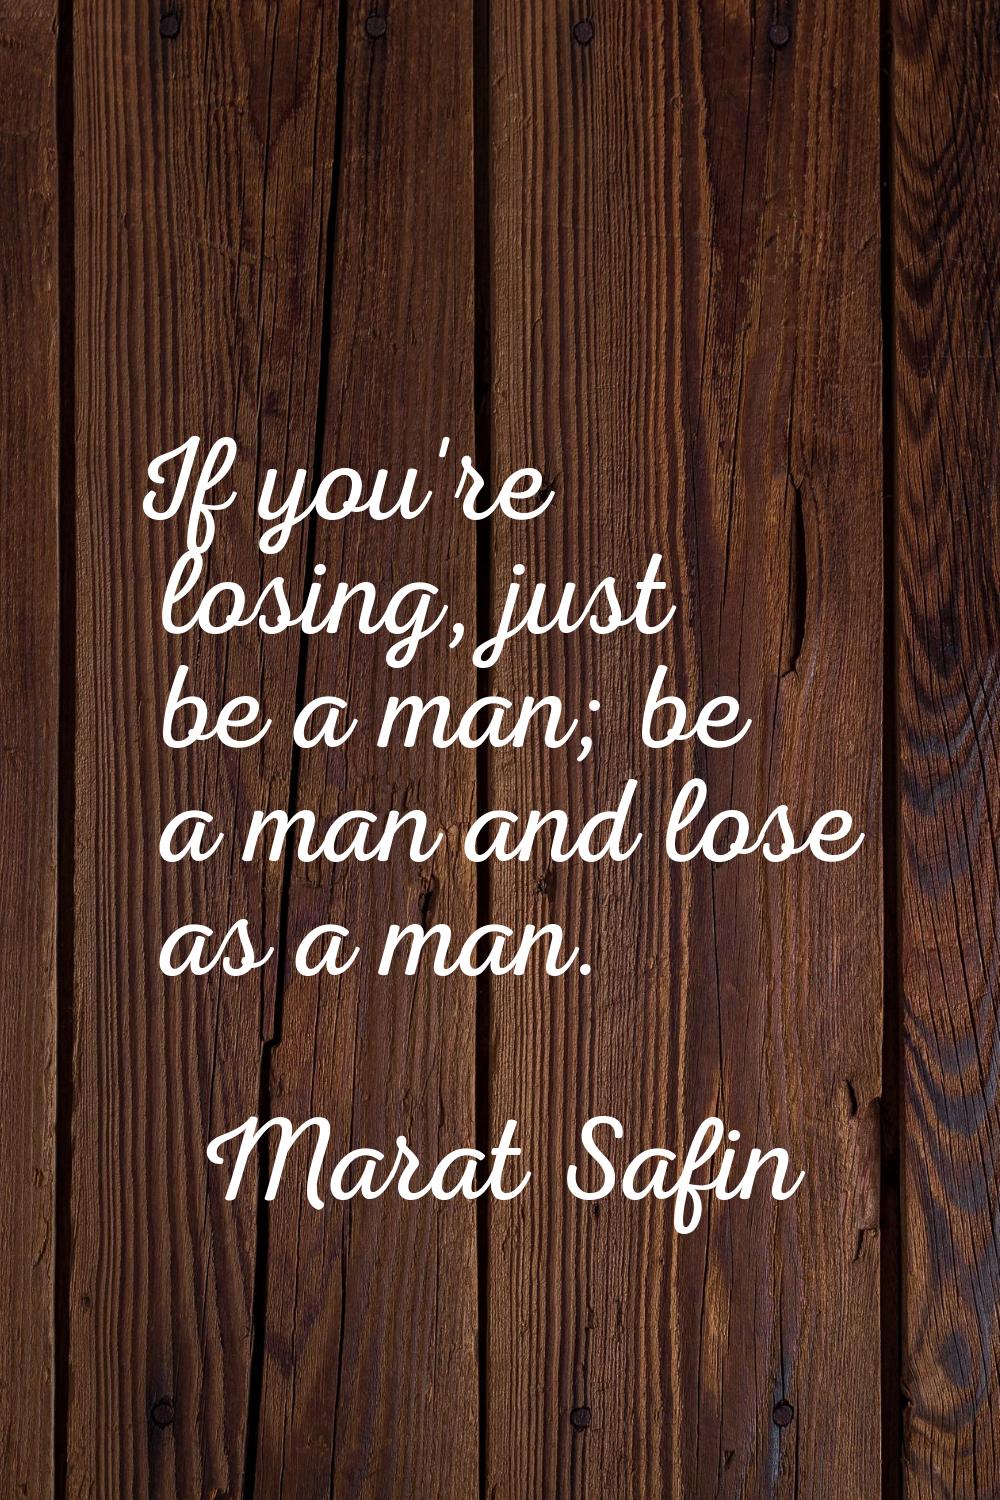 If you're losing, just be a man; be a man and lose as a man.